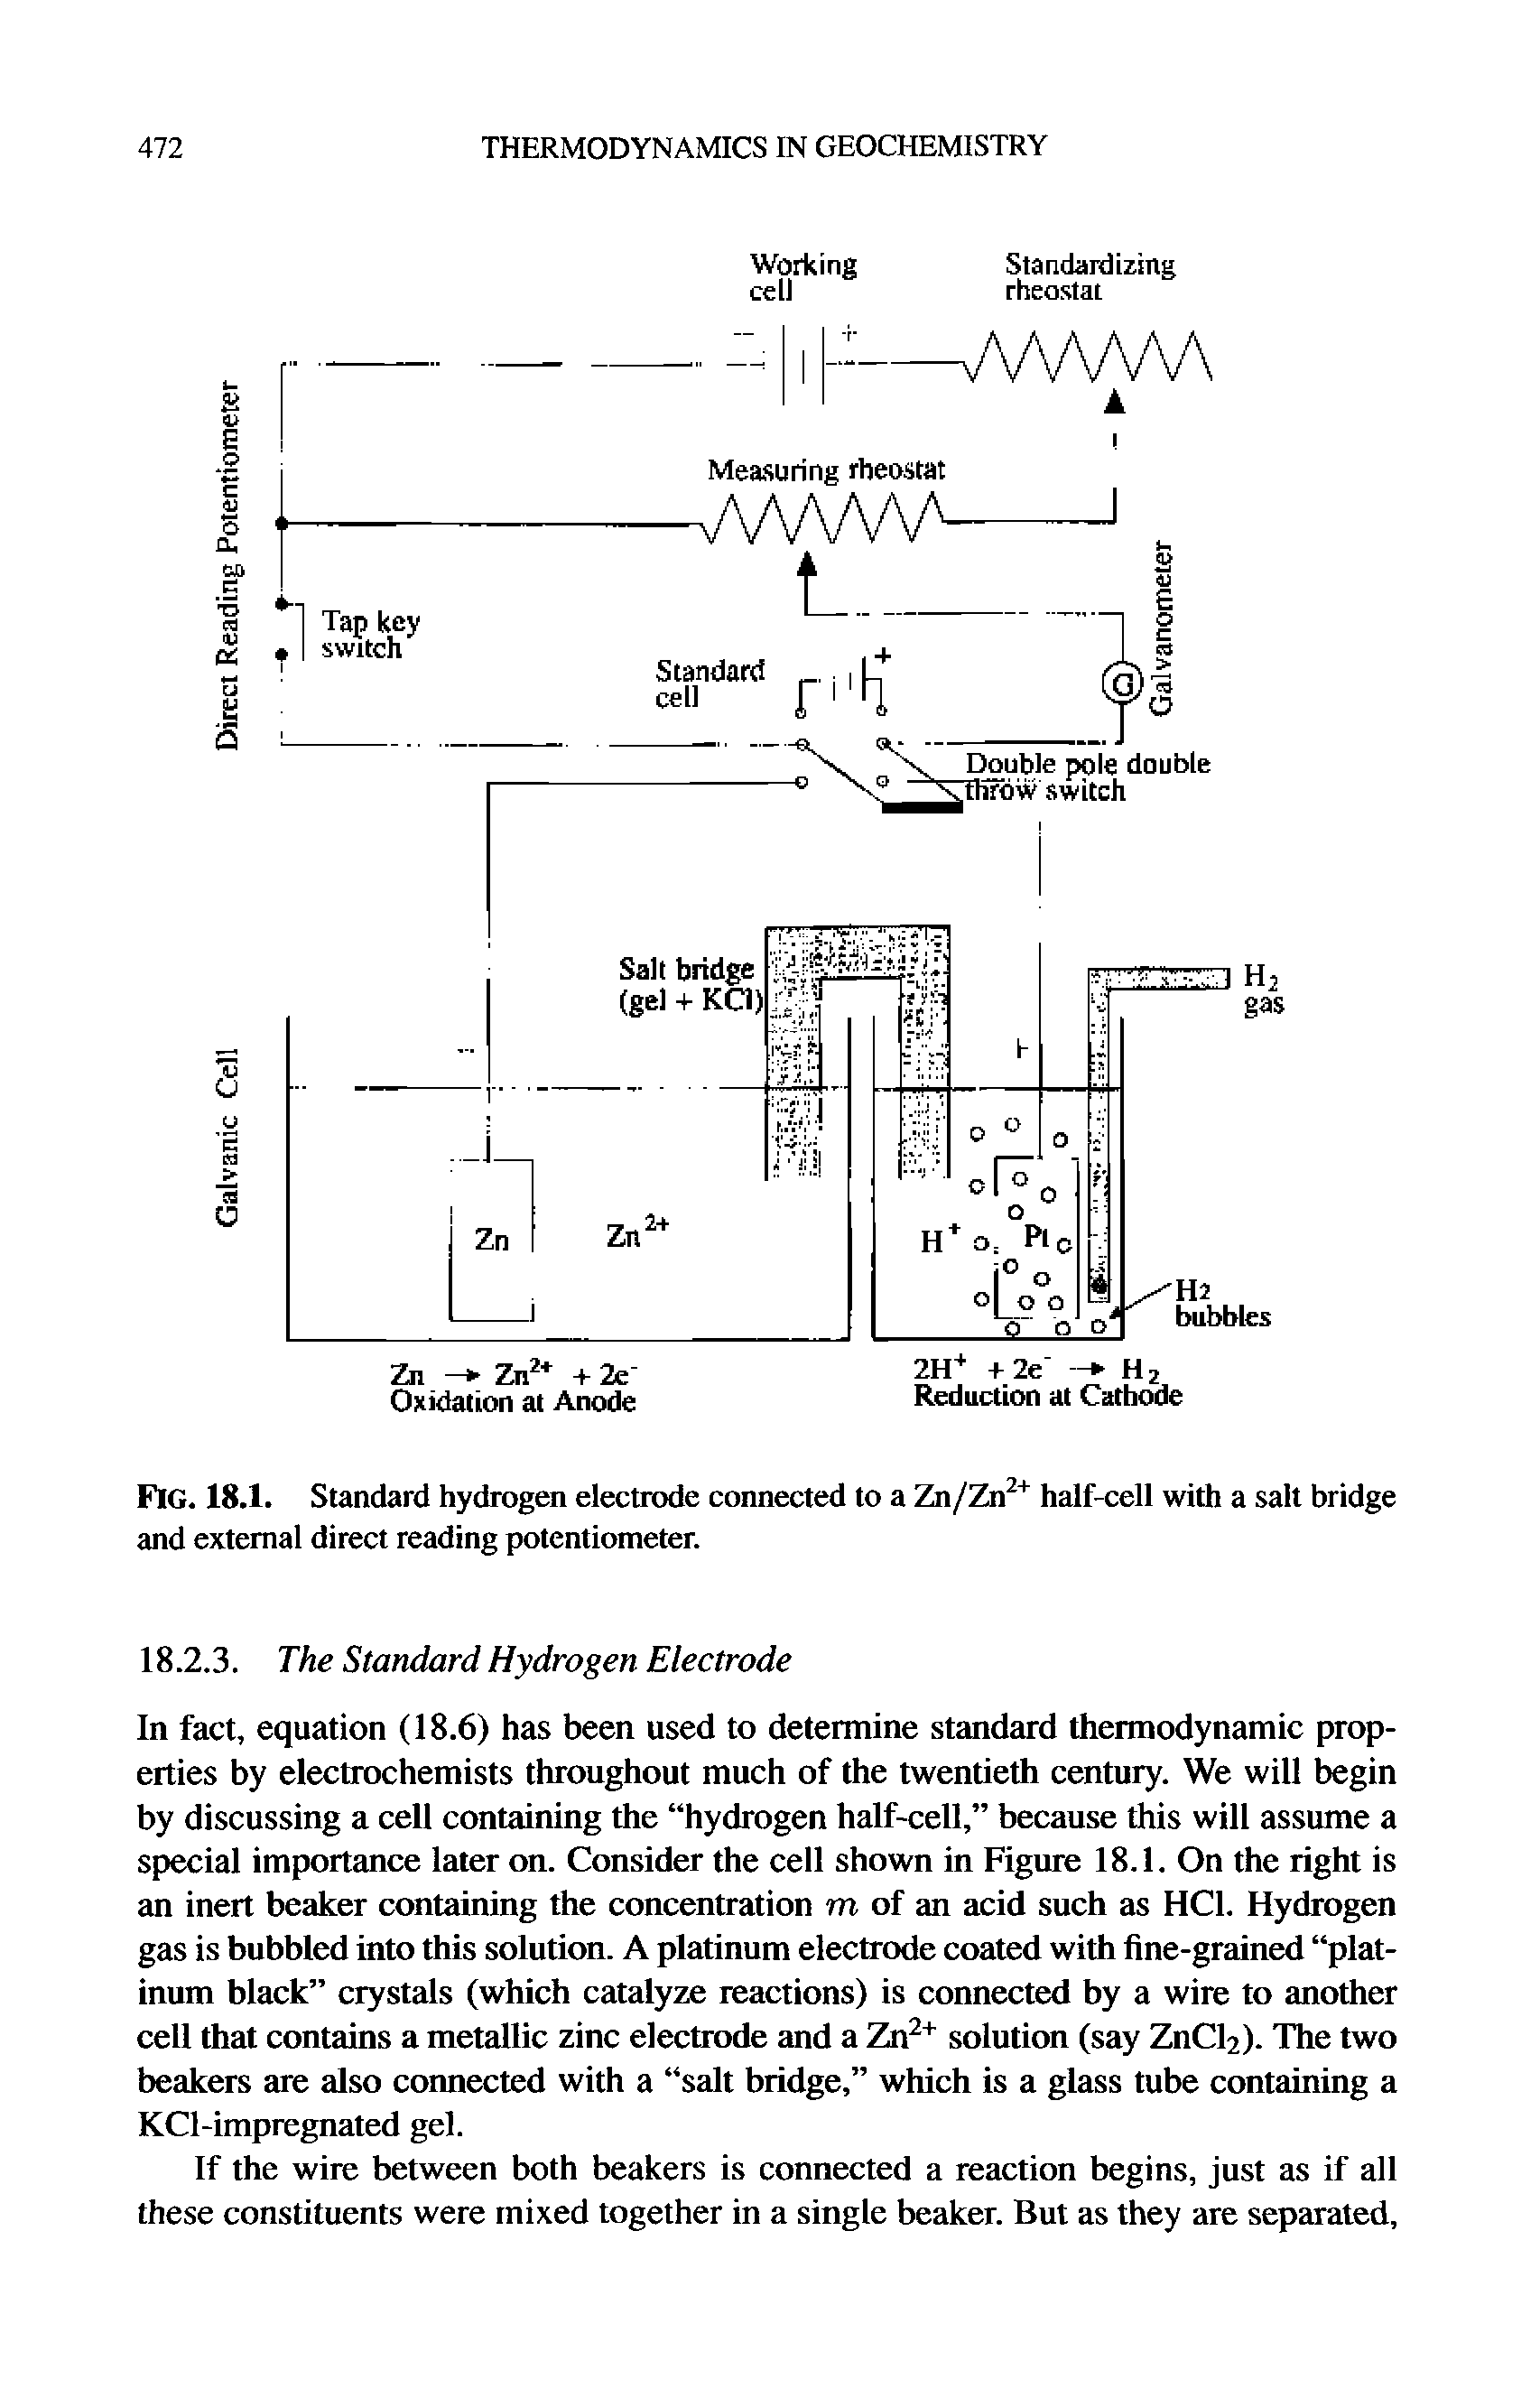 Fig. 18.1. Standard hydrogen electrode connected to a Zn/Zn " half-cell with a salt bridge and external direct reading potentiometer.